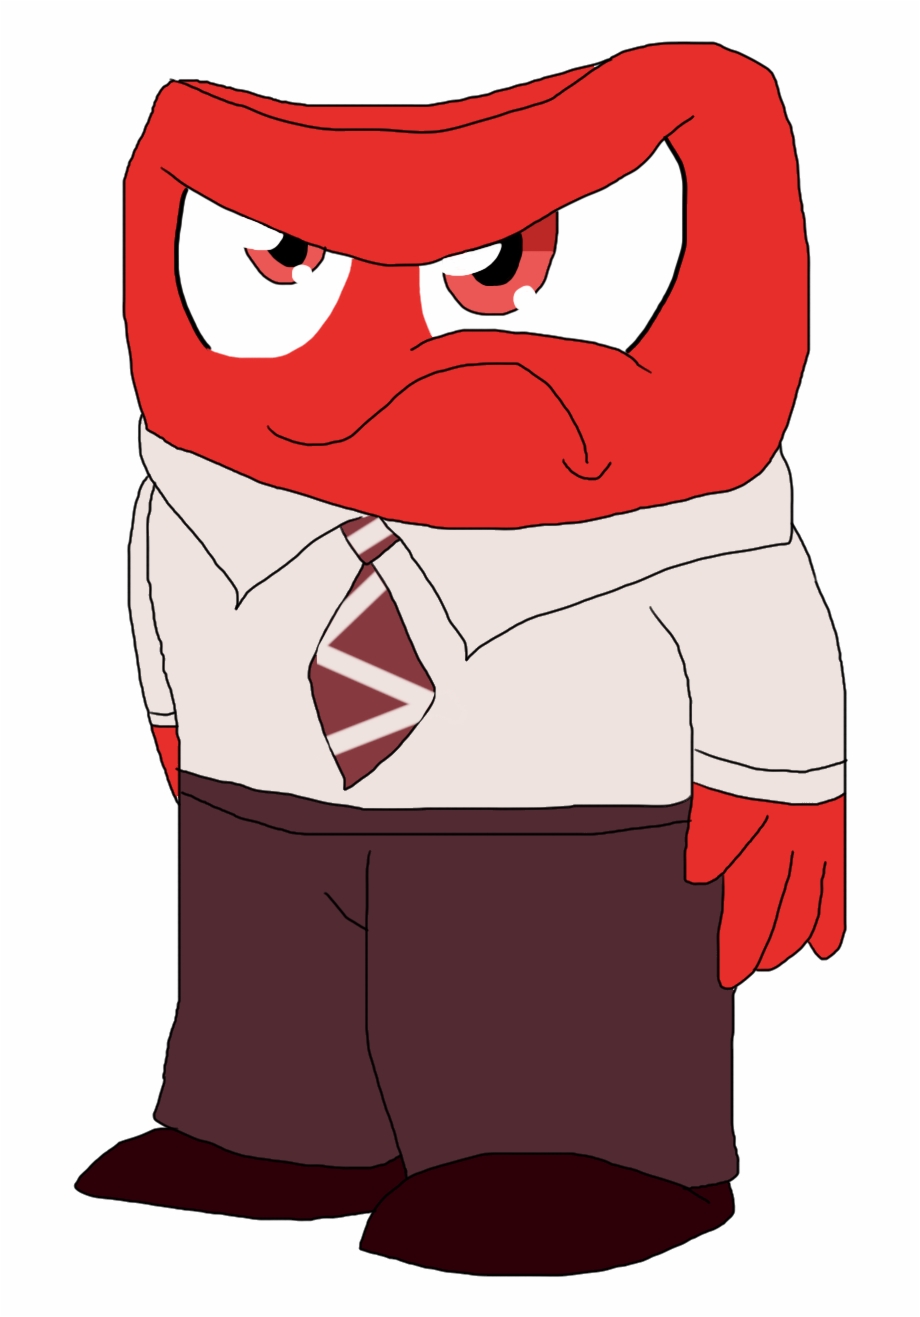 Anger By Sugarpinkwolf Inside Out Deviantart Inside Out